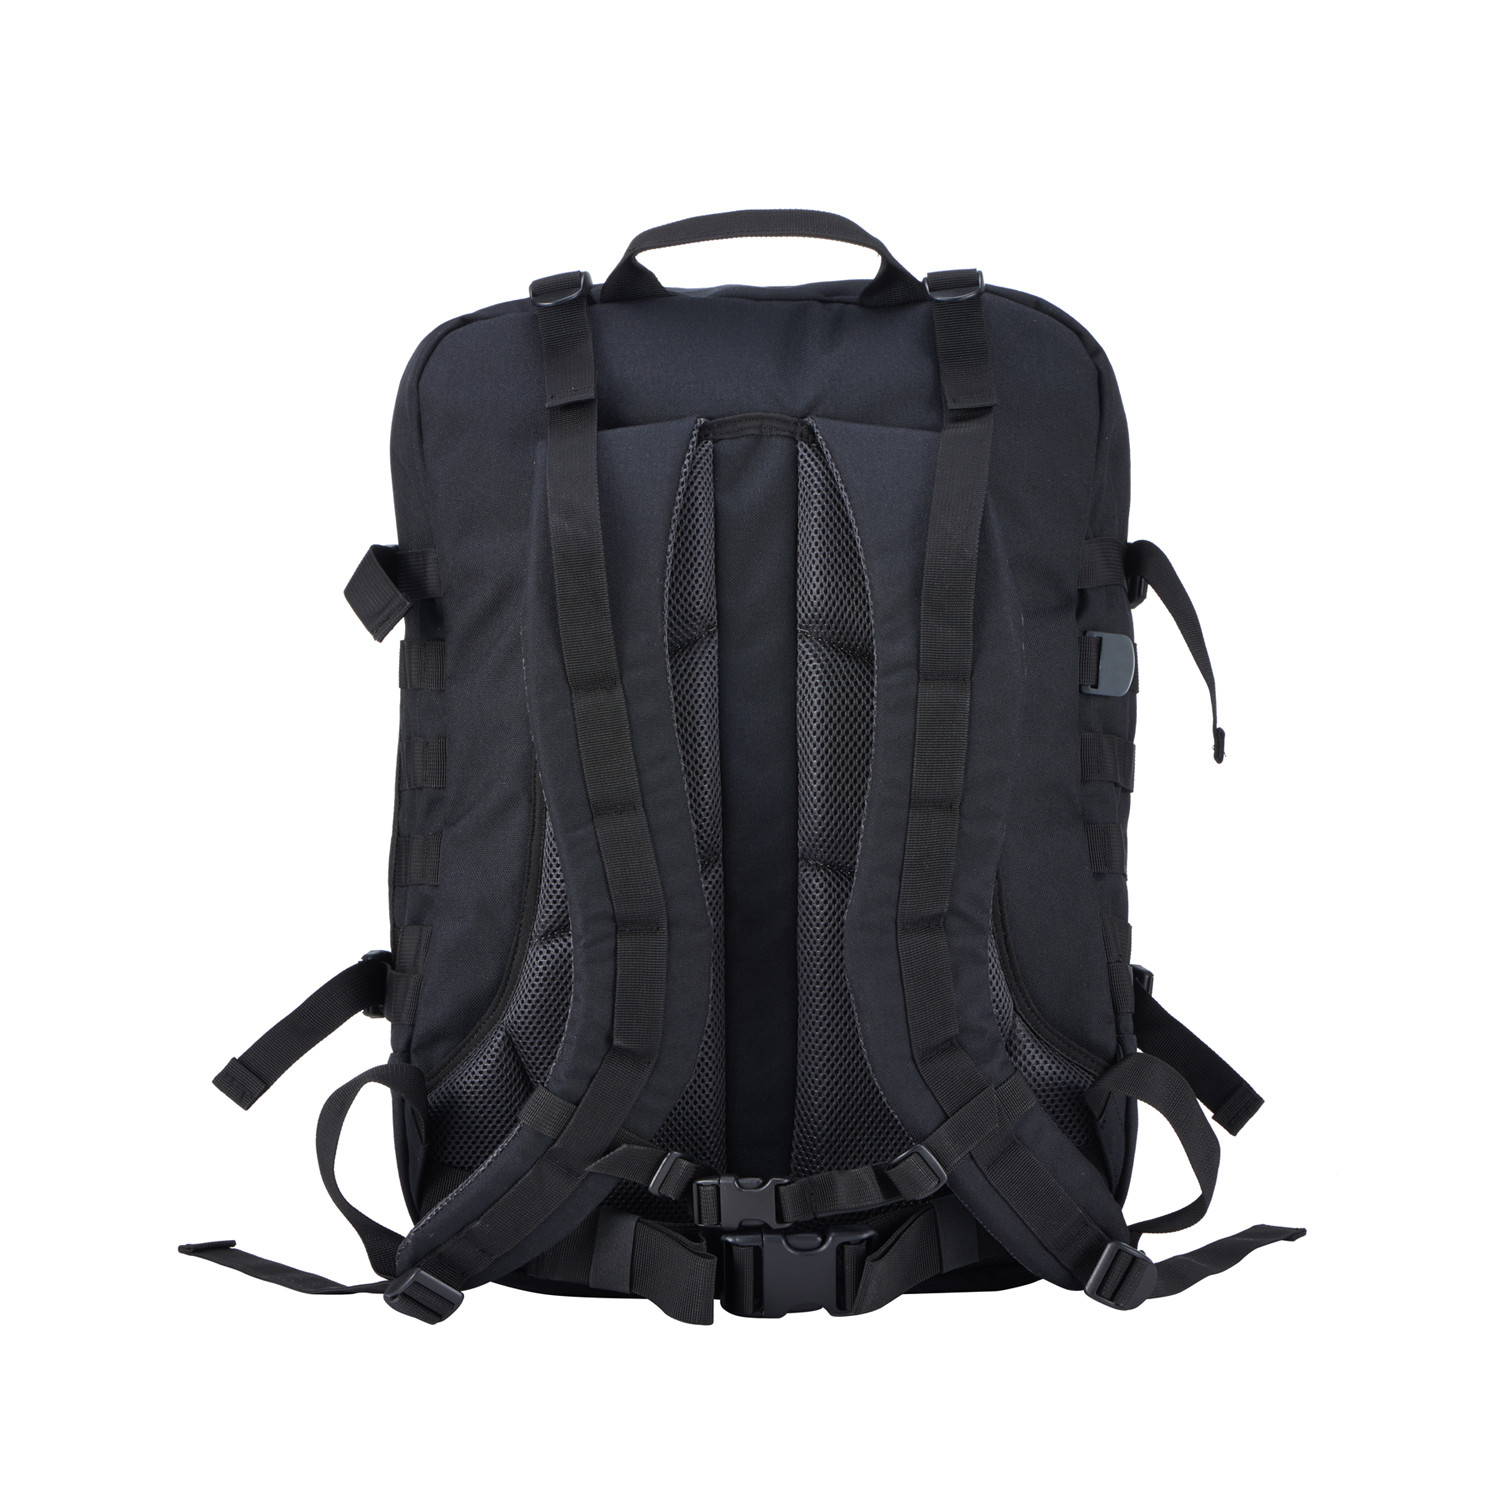 44L Military Backpack // Absolute Black - Cabin Zero - Touch of Modern